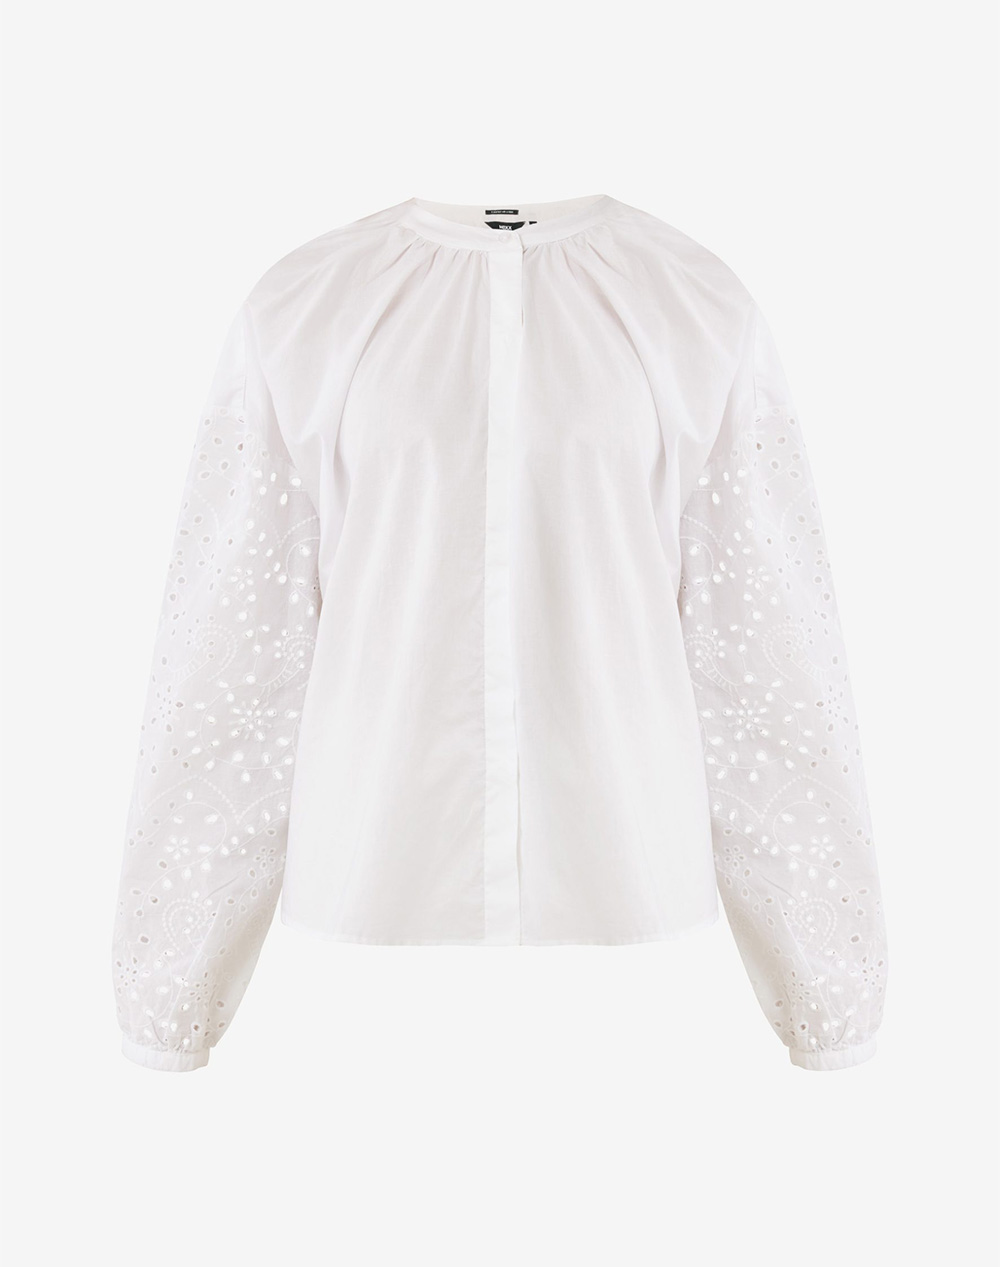 MEXX Blouse with embroidery sleeves and back MF006103041W-110602 OffWhite 3810PMEXX3400188_XR05536